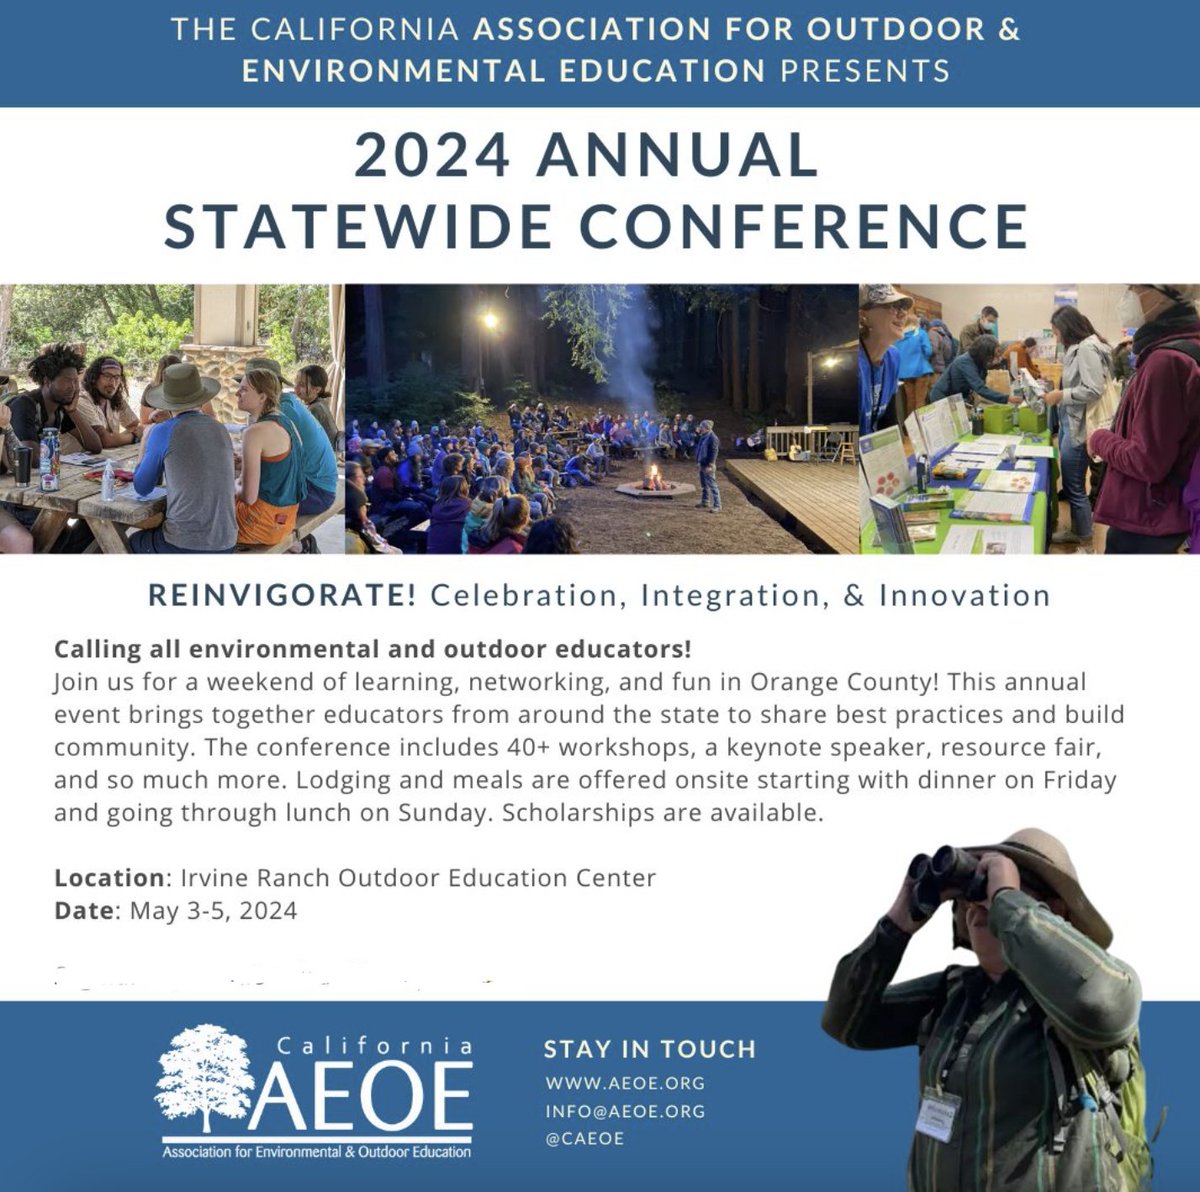 Dive into the world of environmental education with us at the 2024 Statewide @CAEOE Conference! Explore innovative ideas, network with like-minded professionals, and join us in shaping the future of EE. We hope to see you there! To register, visit aeoe.org/Conference-2024.